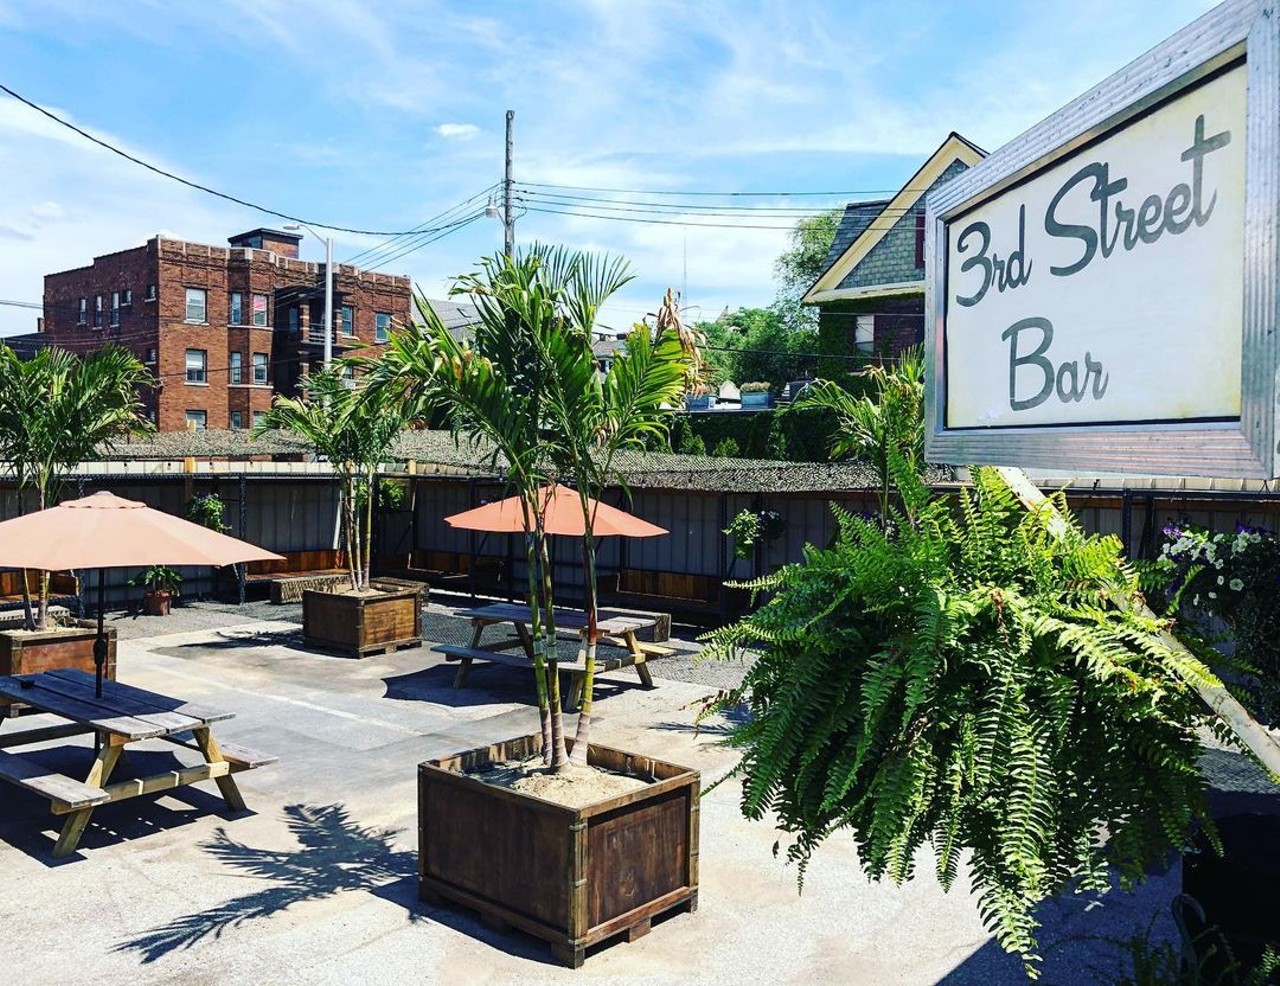 3rd Street Bar
4626 3rd Ave., Detroit; 313-833-0603
This sprawling bar has a fireplace, a patio, slushies, and Skee-Ball.
Photo courtesy of Instagram/@3rd_street_detroit